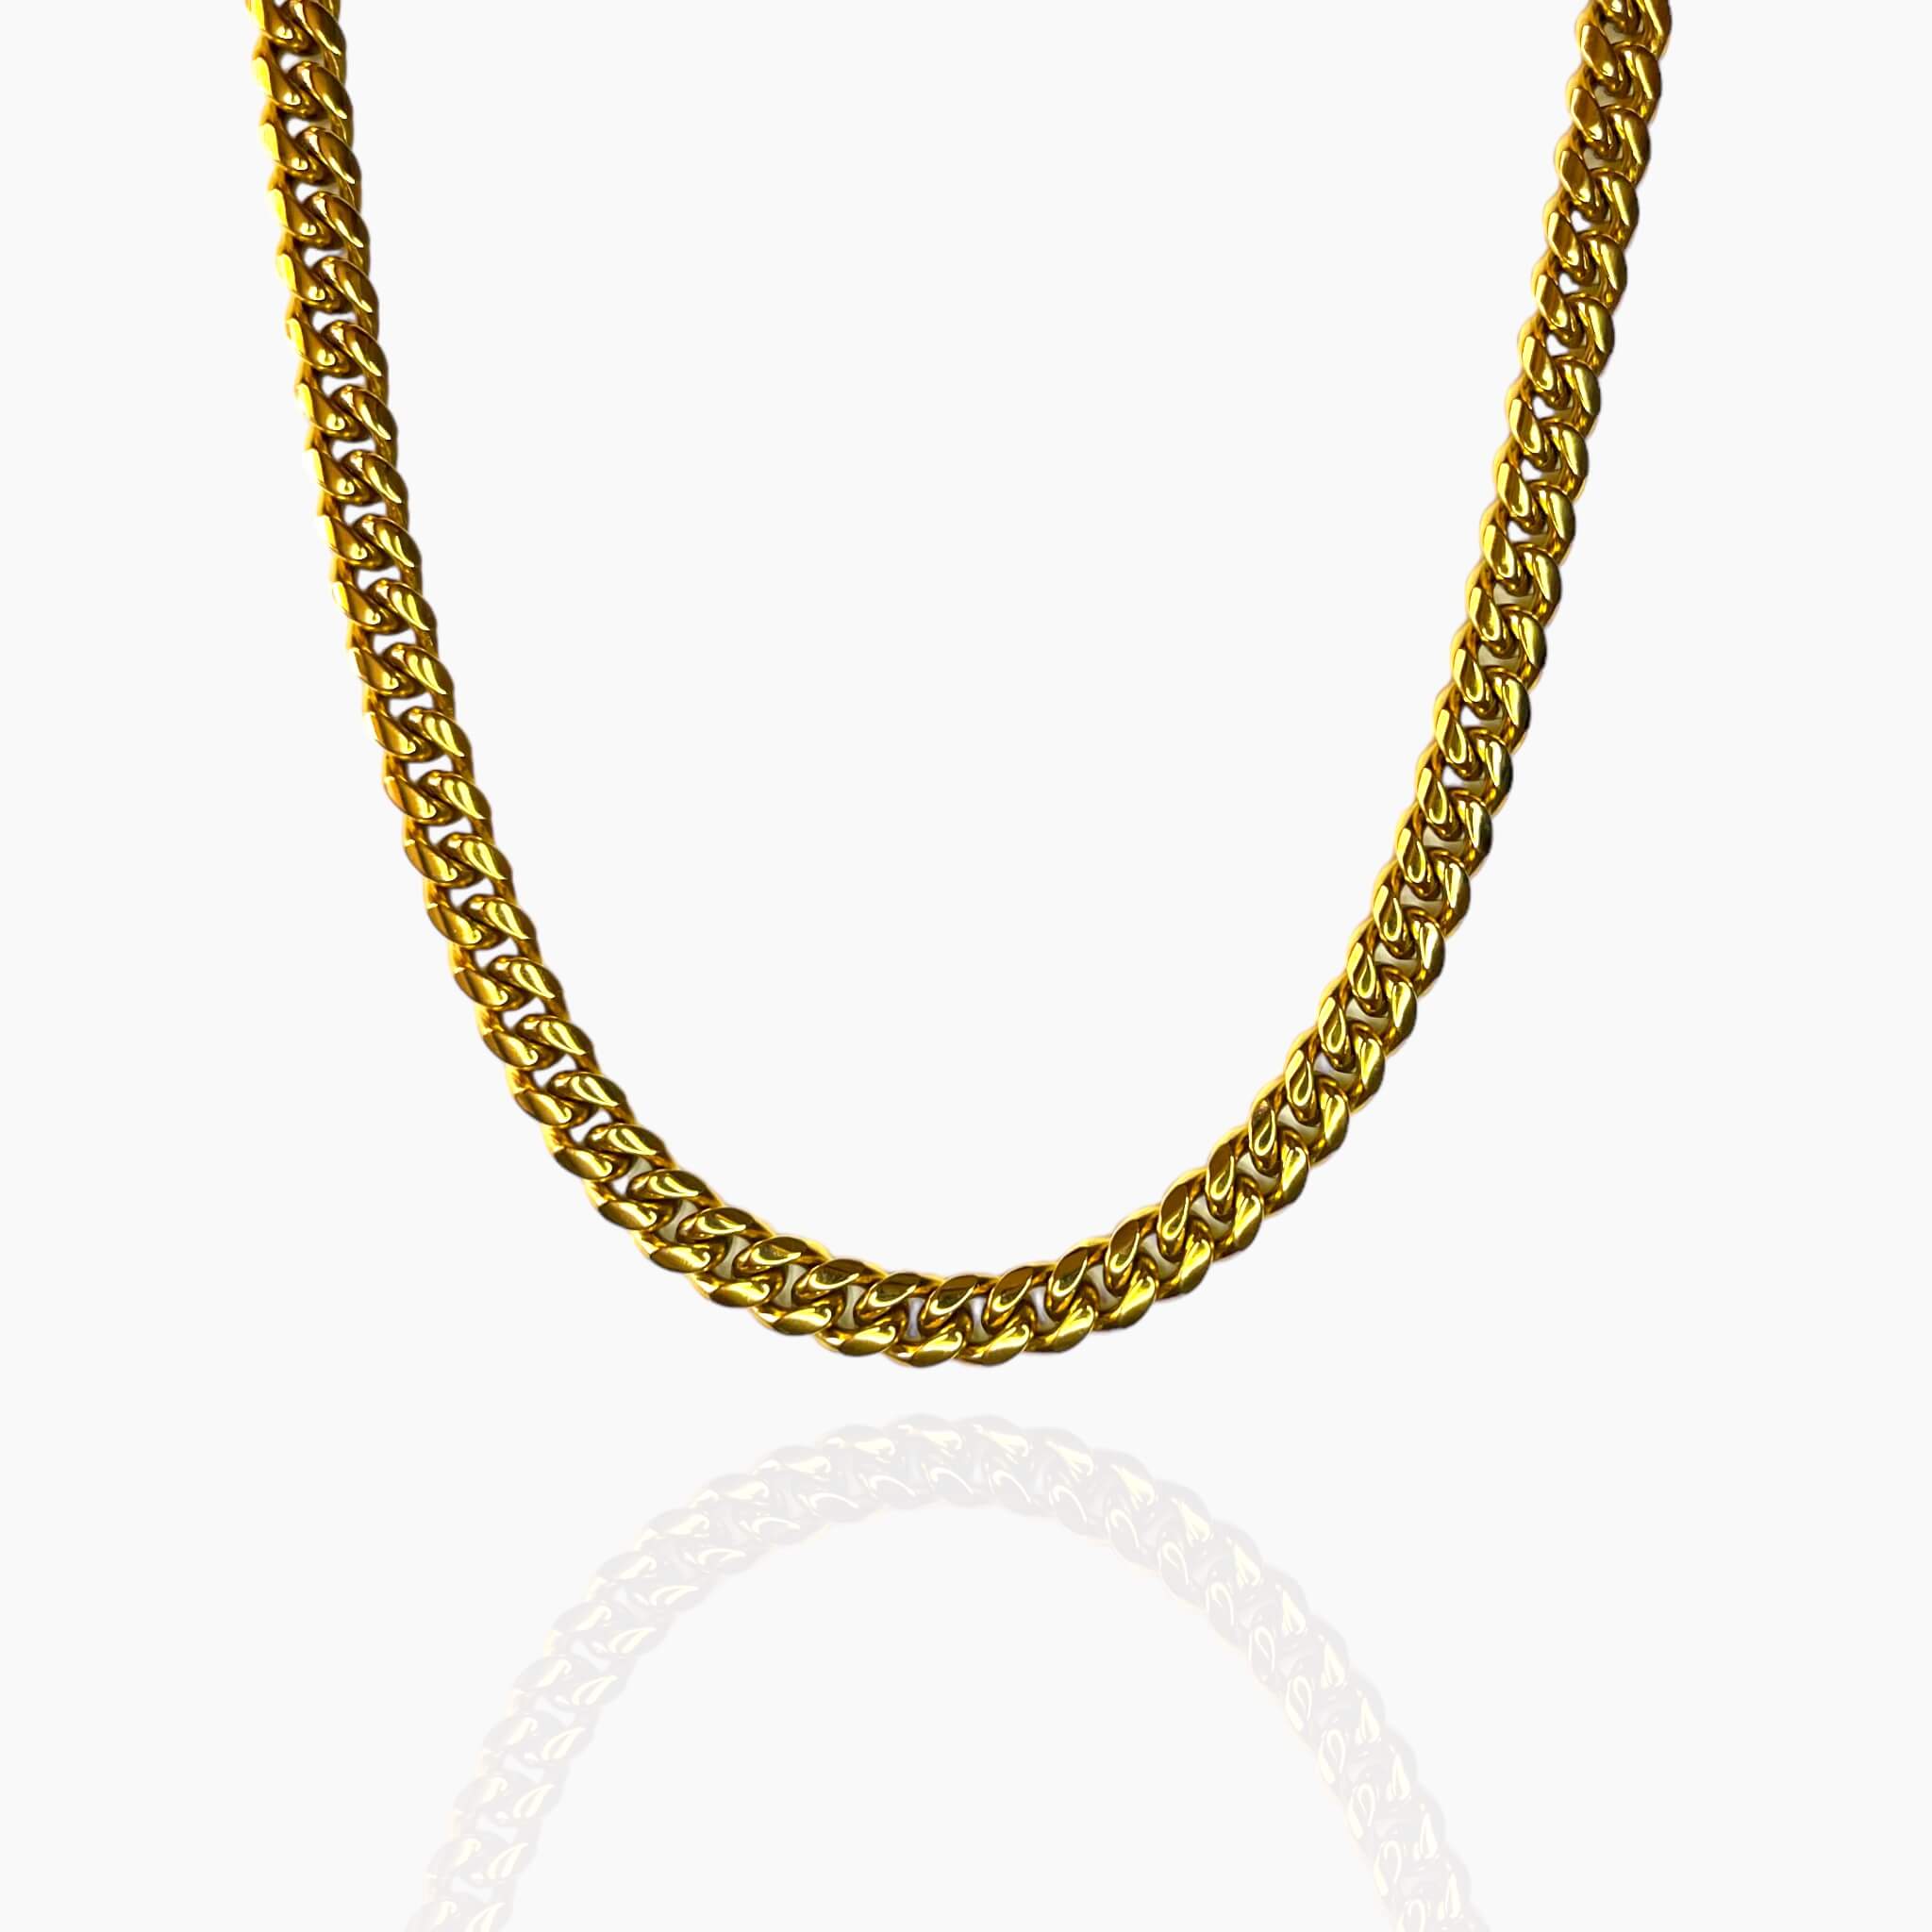 lv chain links necklace Cheap Sell - OFF 63%